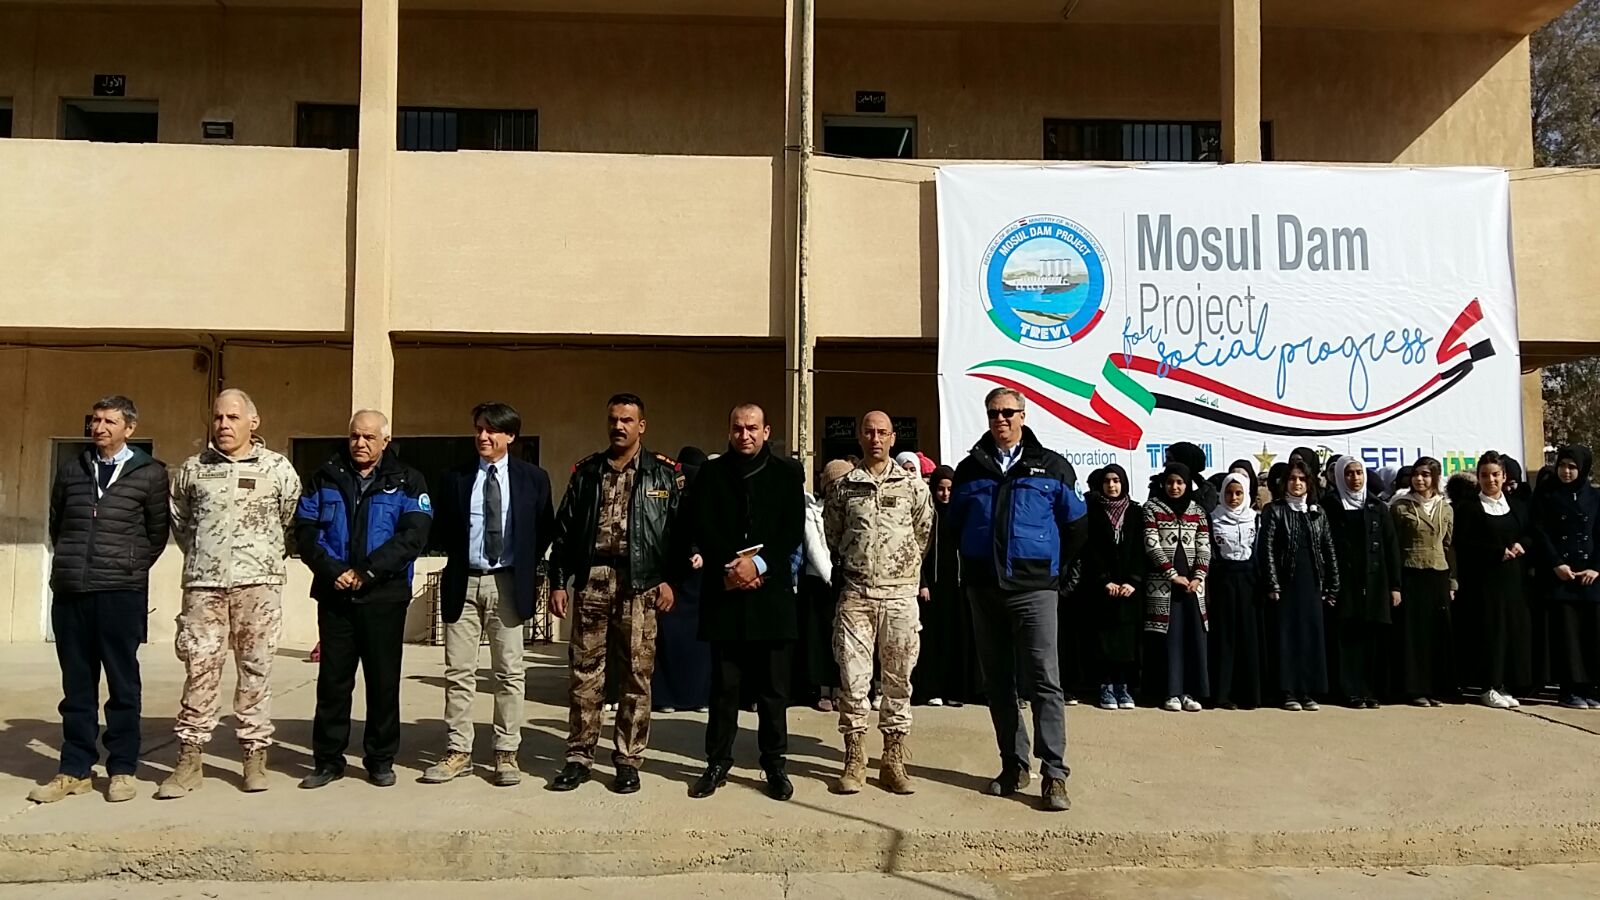 Mosul Dam Project for Social